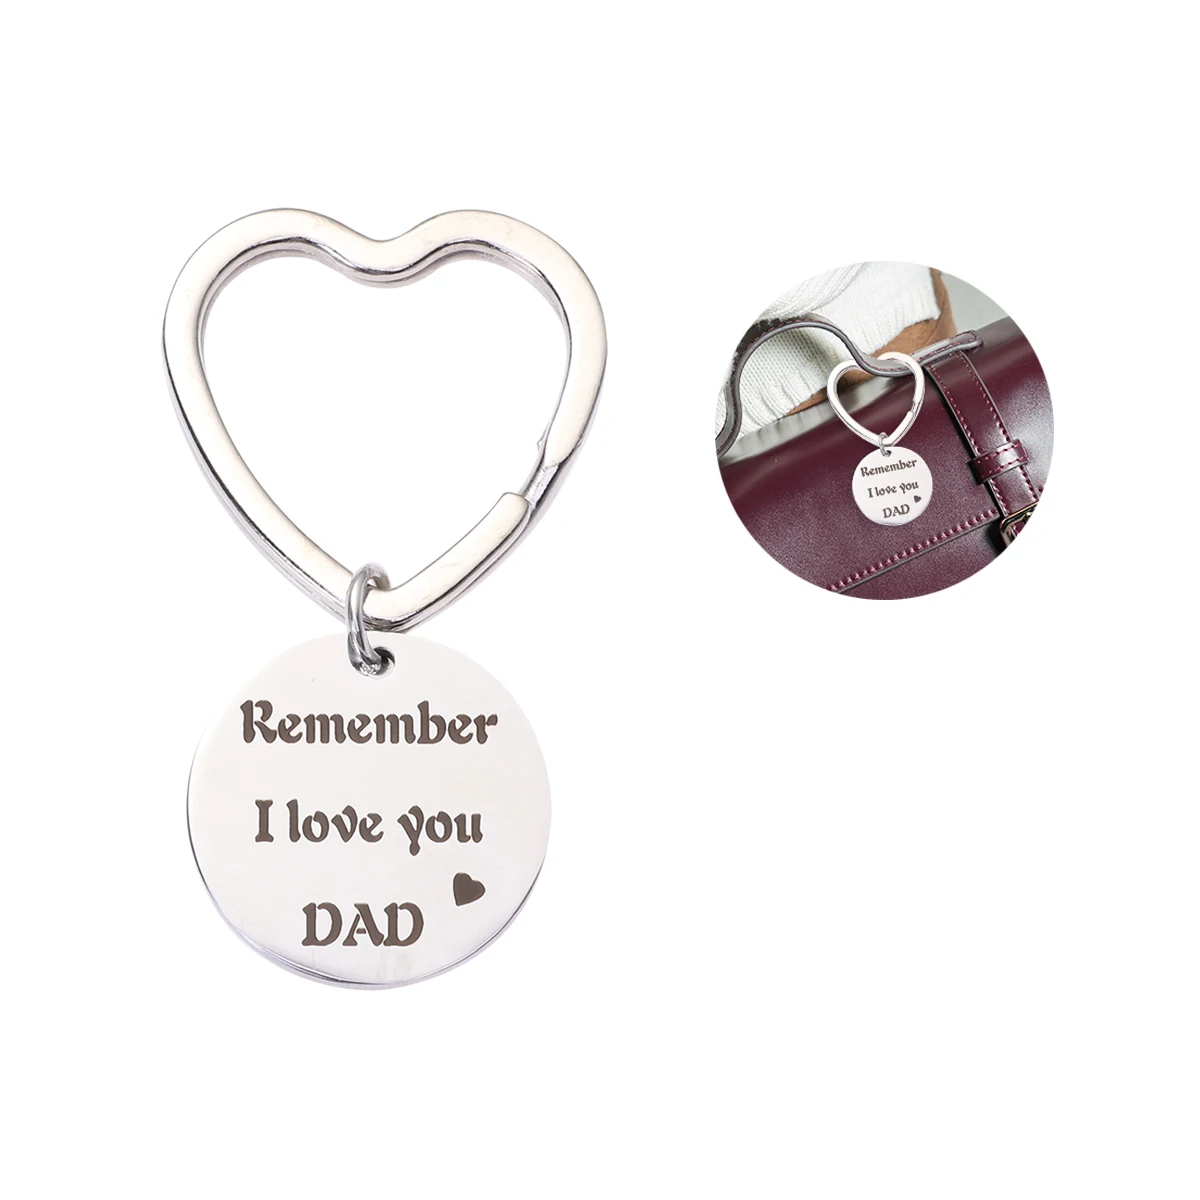 Фото 1pc Father'S Day Gifts Hanging Keyring KeyChain For Father Dad Mom Keyrings Drop Key Ring Chain Men Male Man | Автомобили и